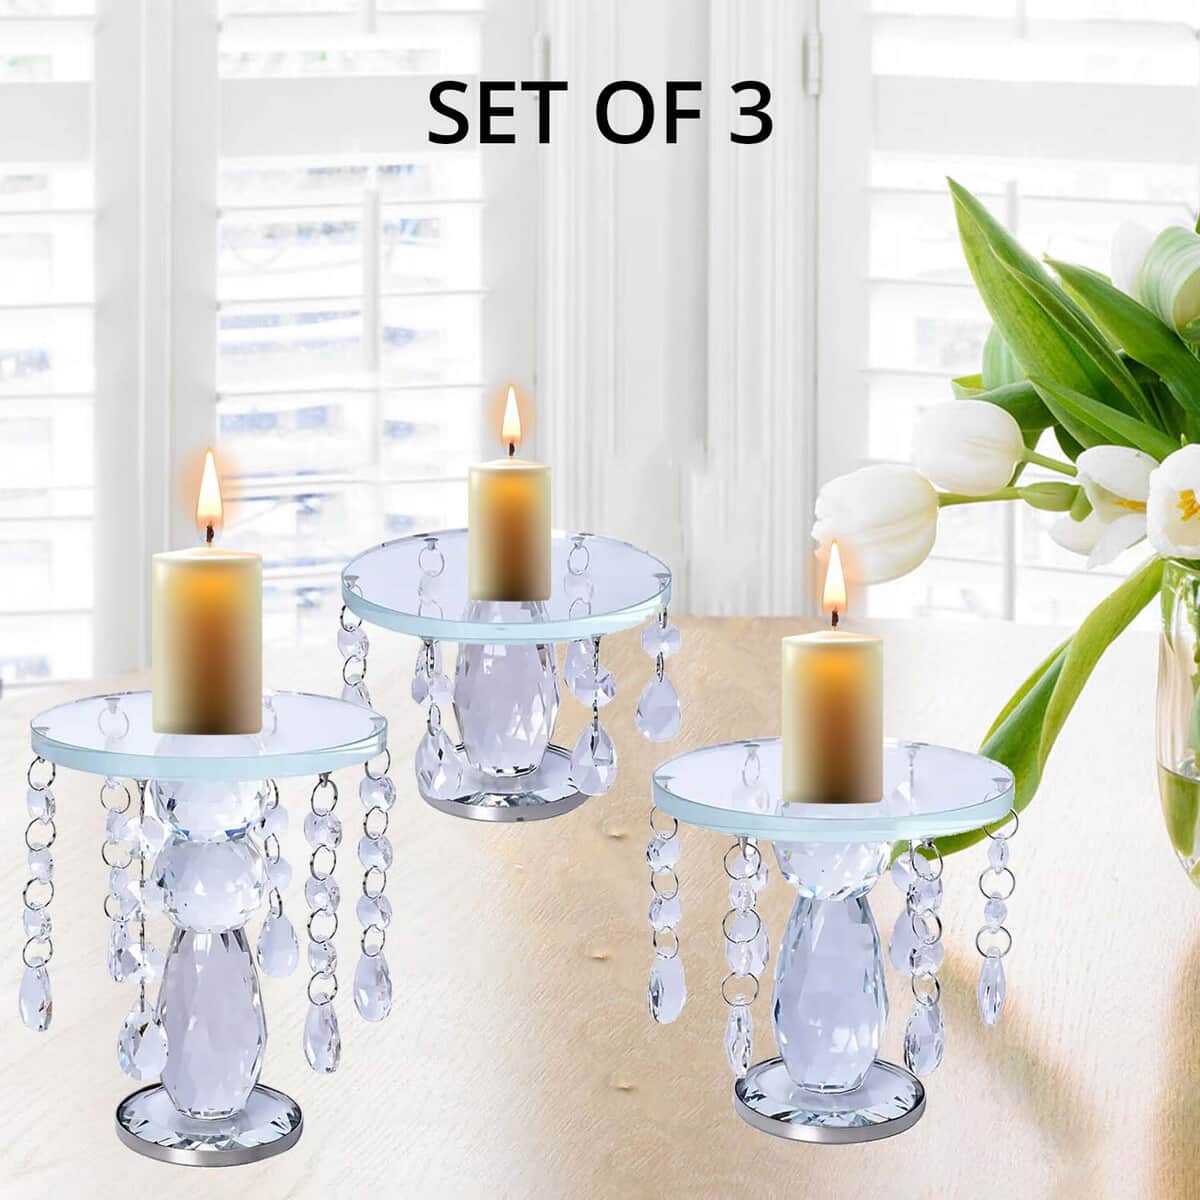 Set of 3 Clear Crystal Drop Charm Pillar Candle Holder, Crystal Pillar Candle Stick Holder, Decorative Crystal Room Decor, Crystal Decorations image number 3